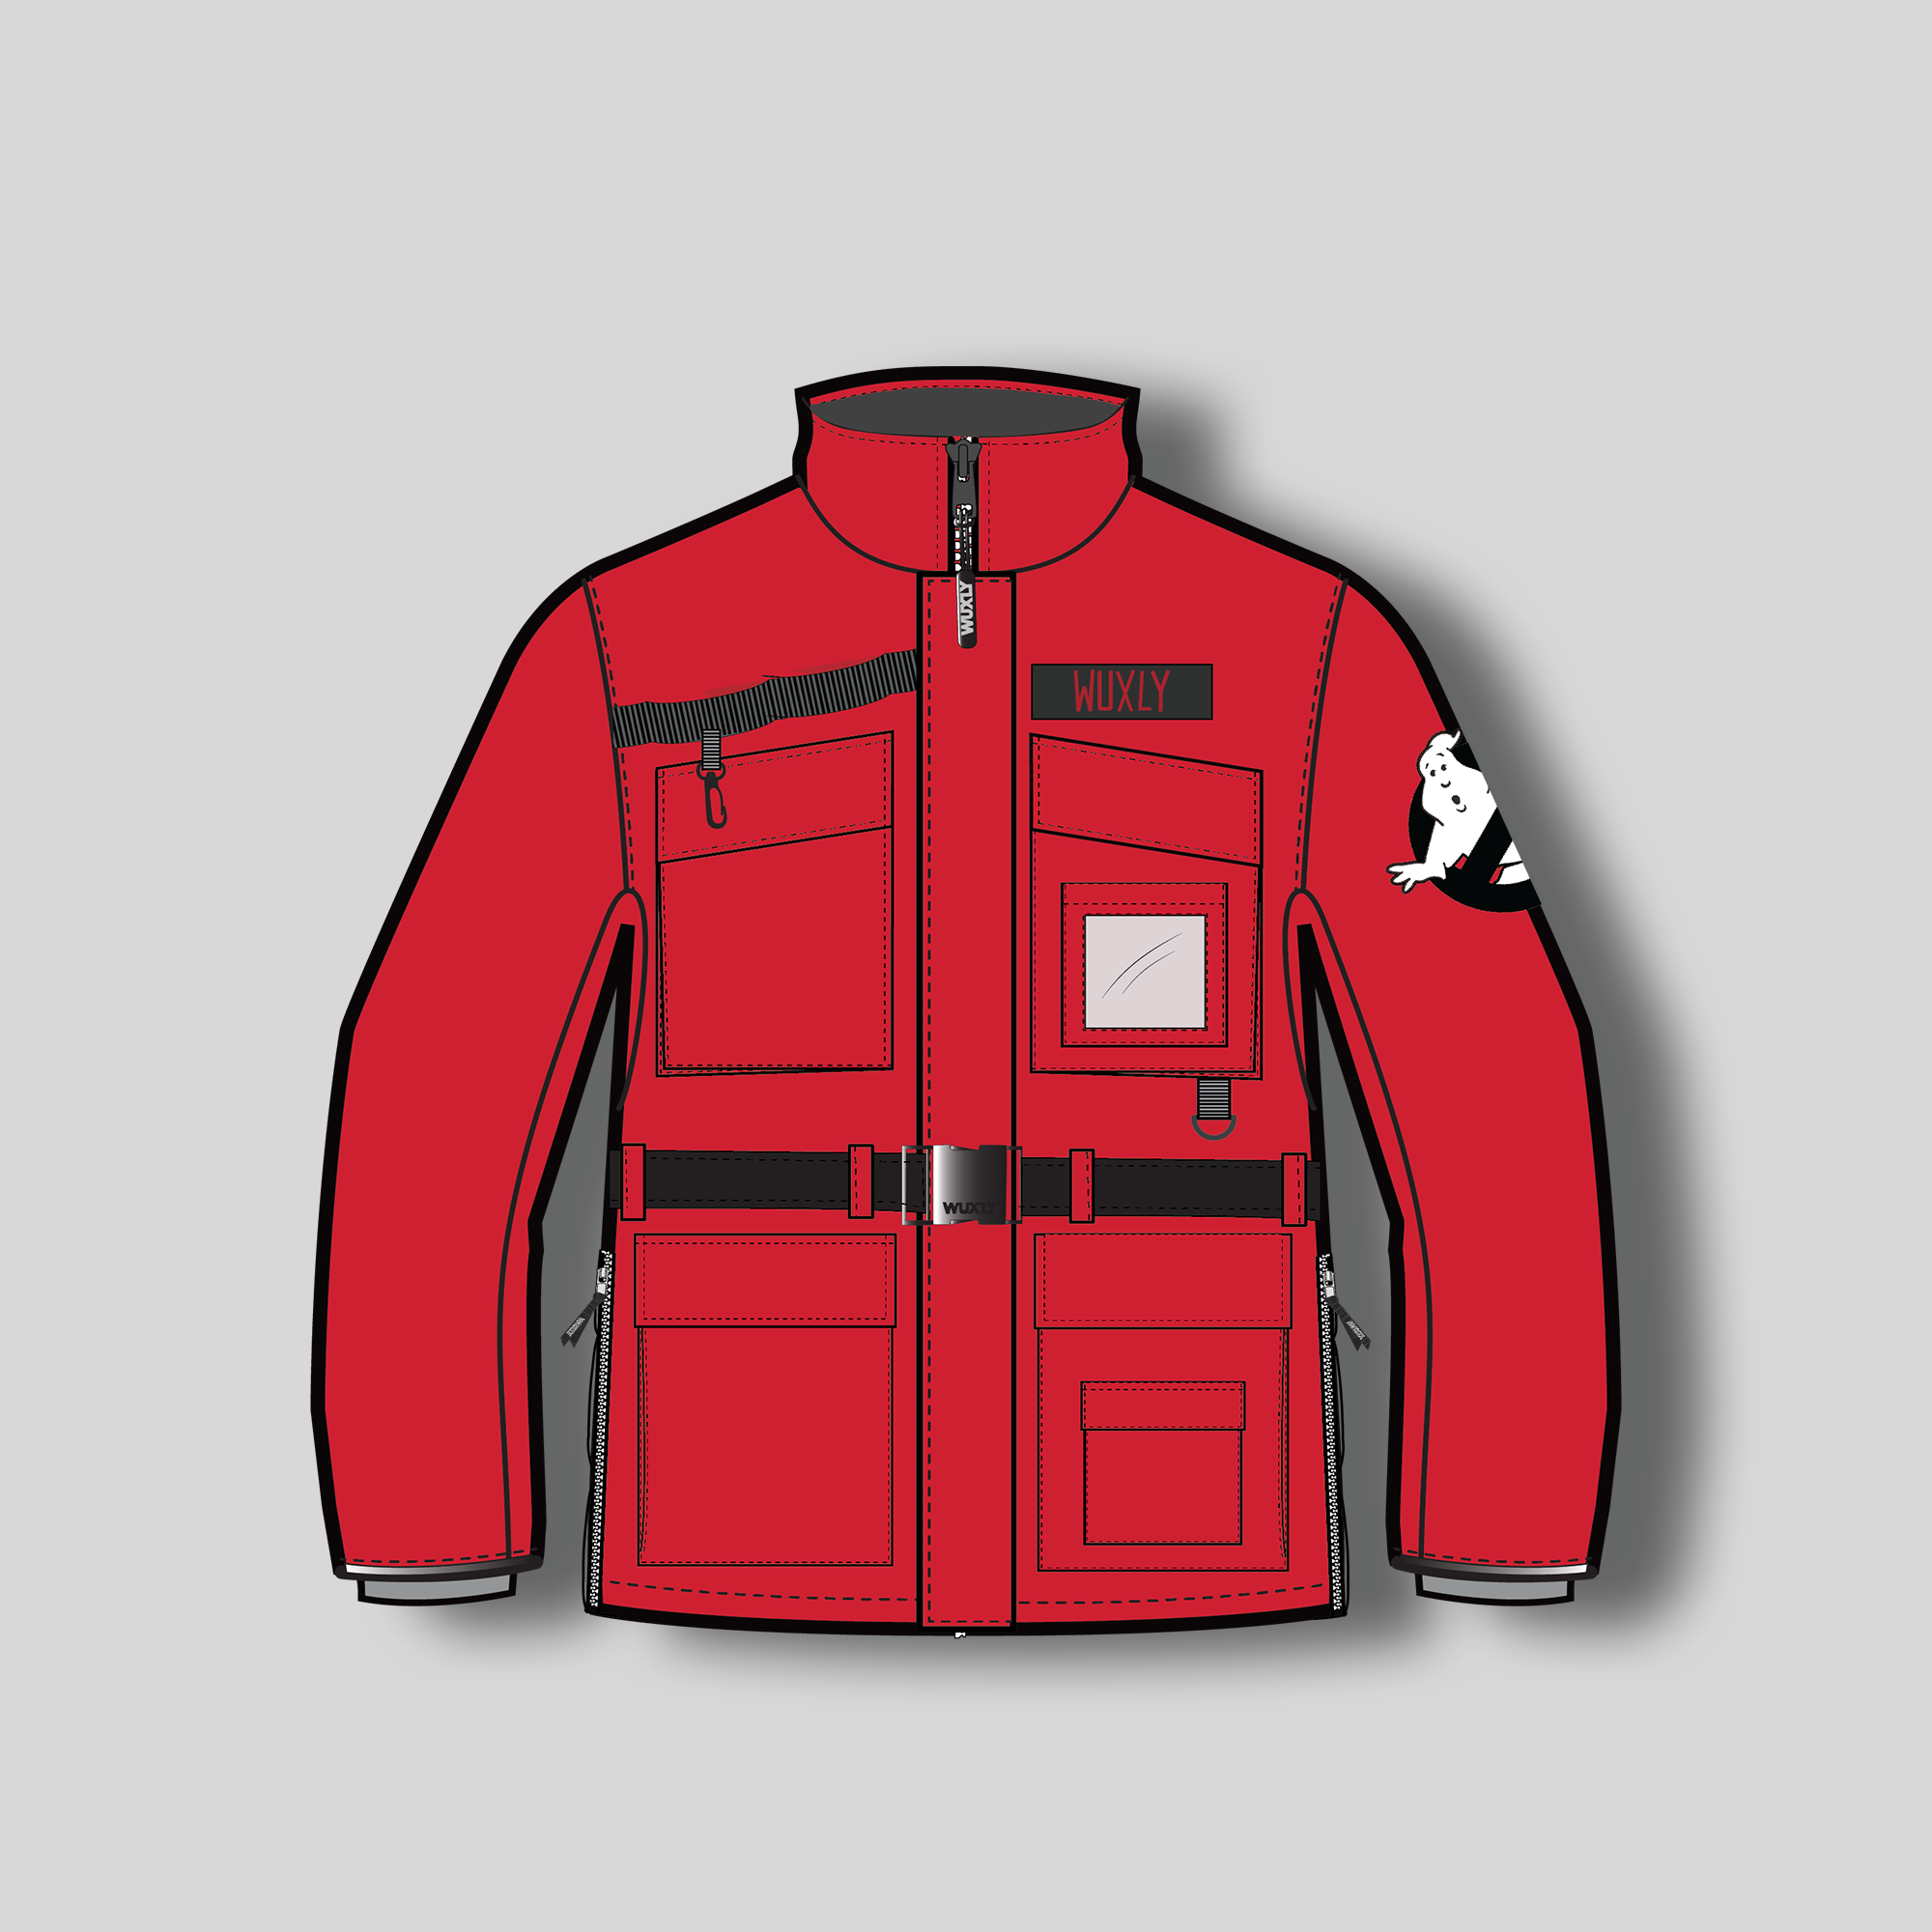 Wuxly x Ghostbusters Frozen Empire "Hero" Sabertooth II Parka Red